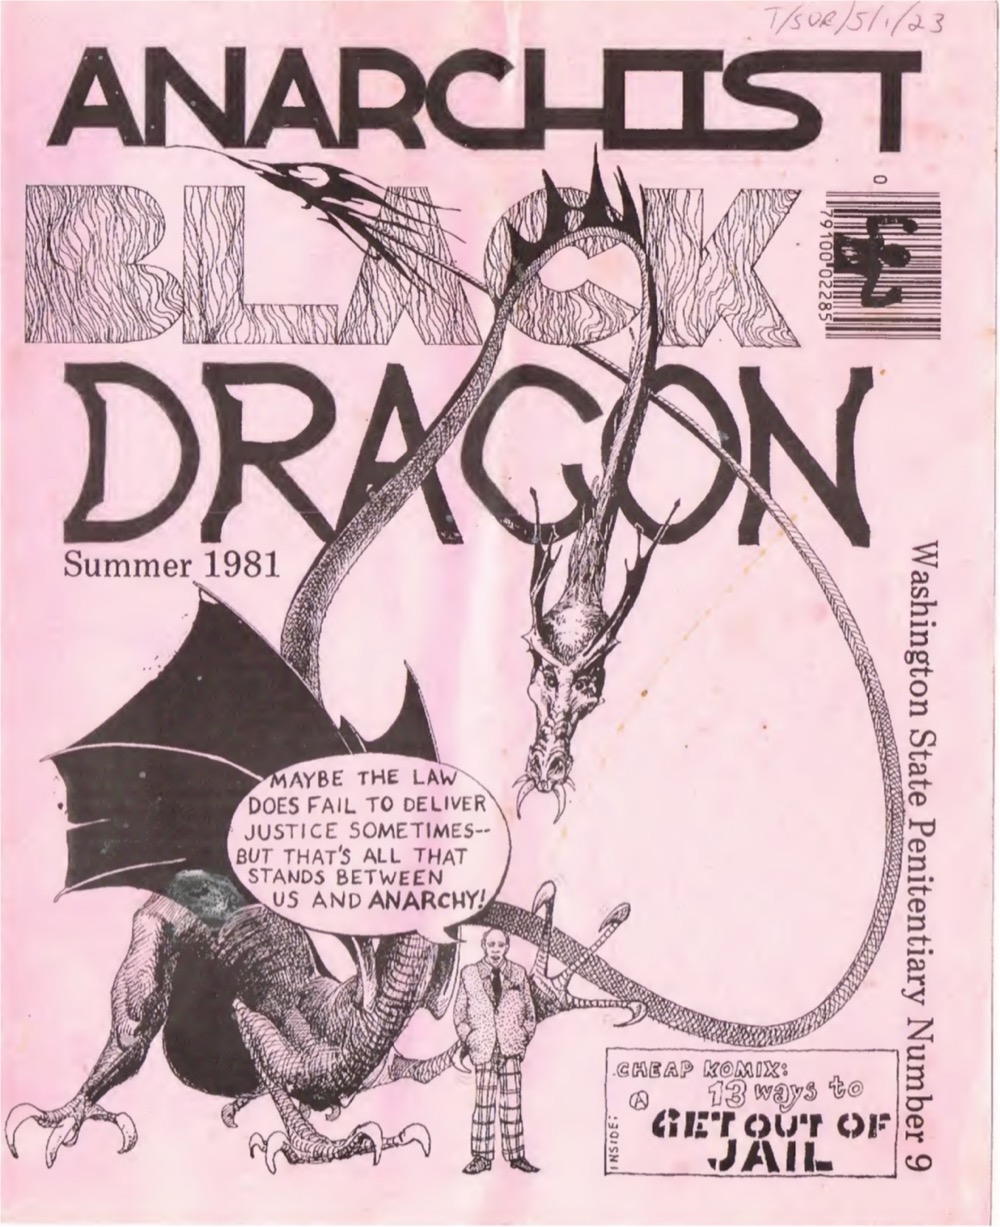 cover of the Anarchist Black Dragon, a prison newspaper